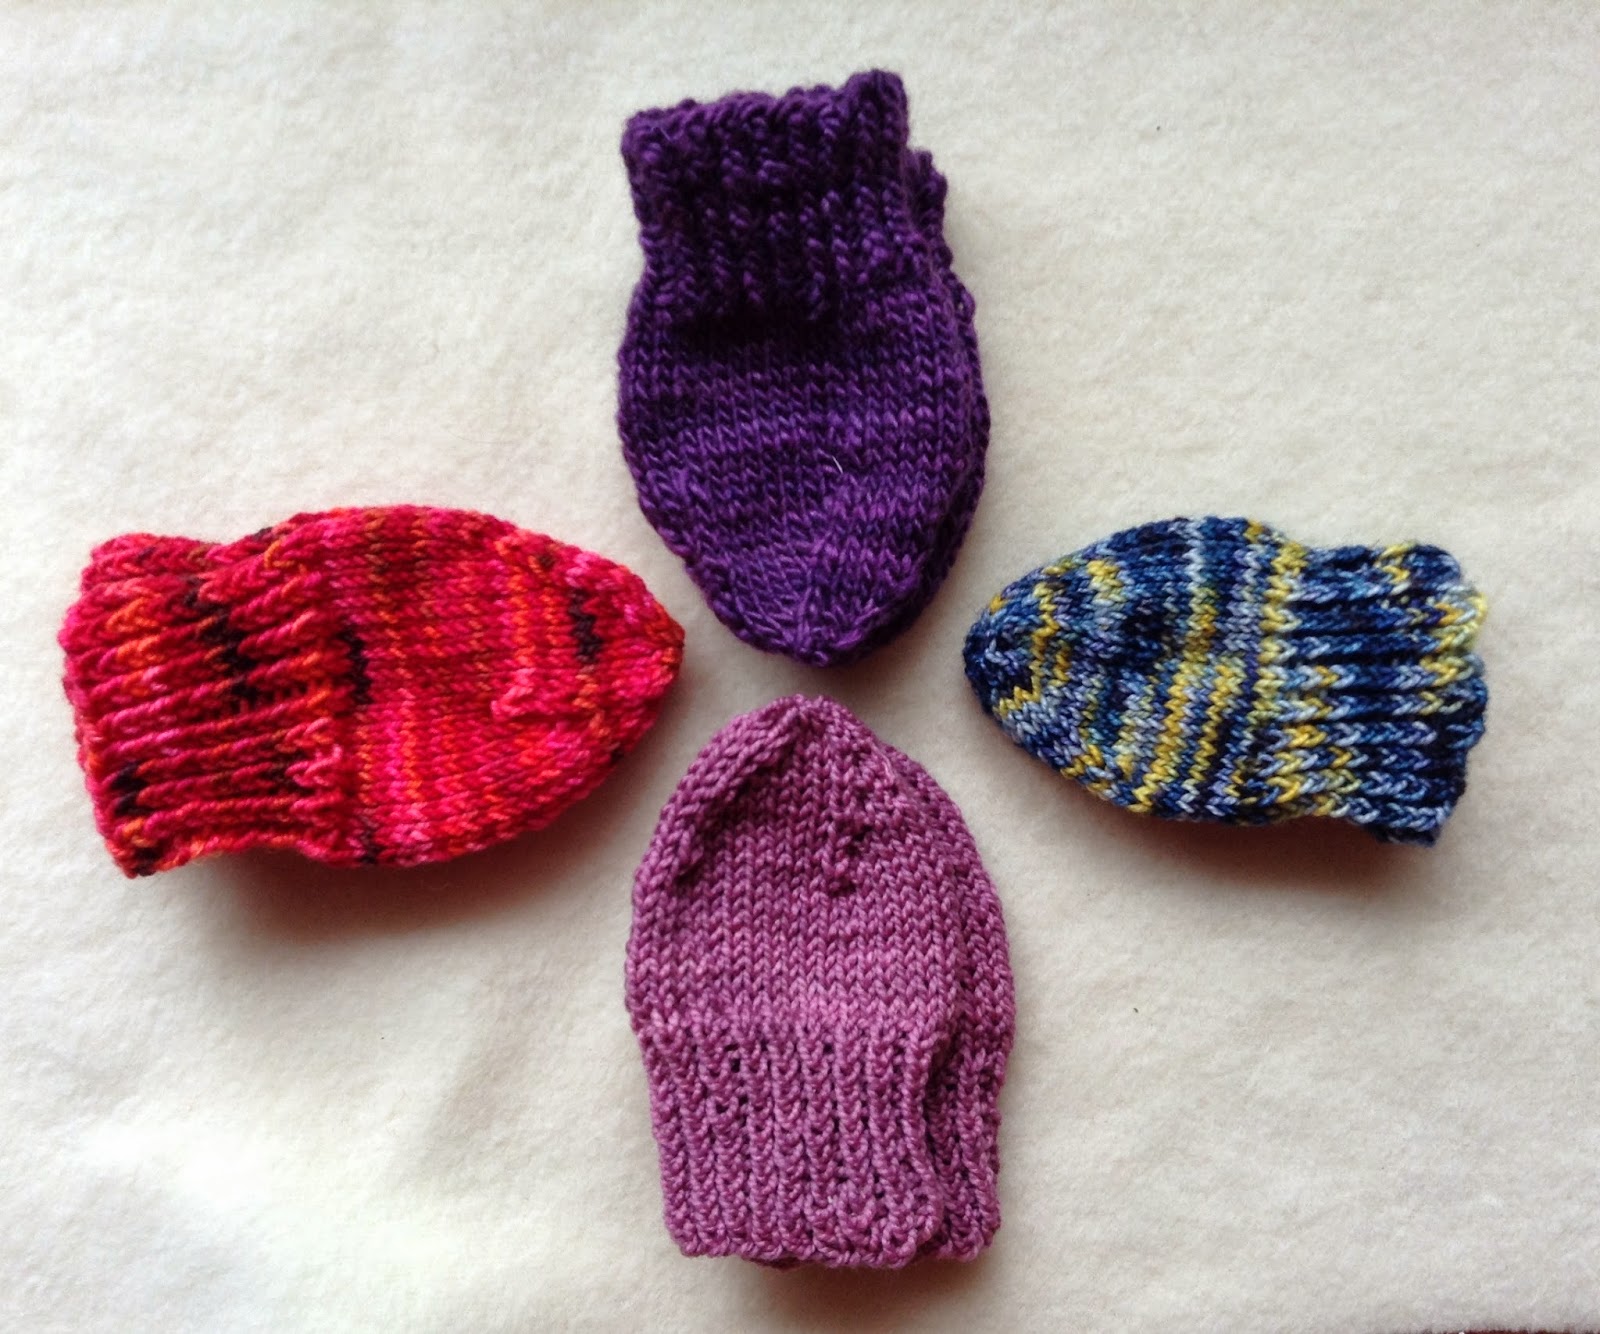 Knitting for Peace: Infant Mitts III